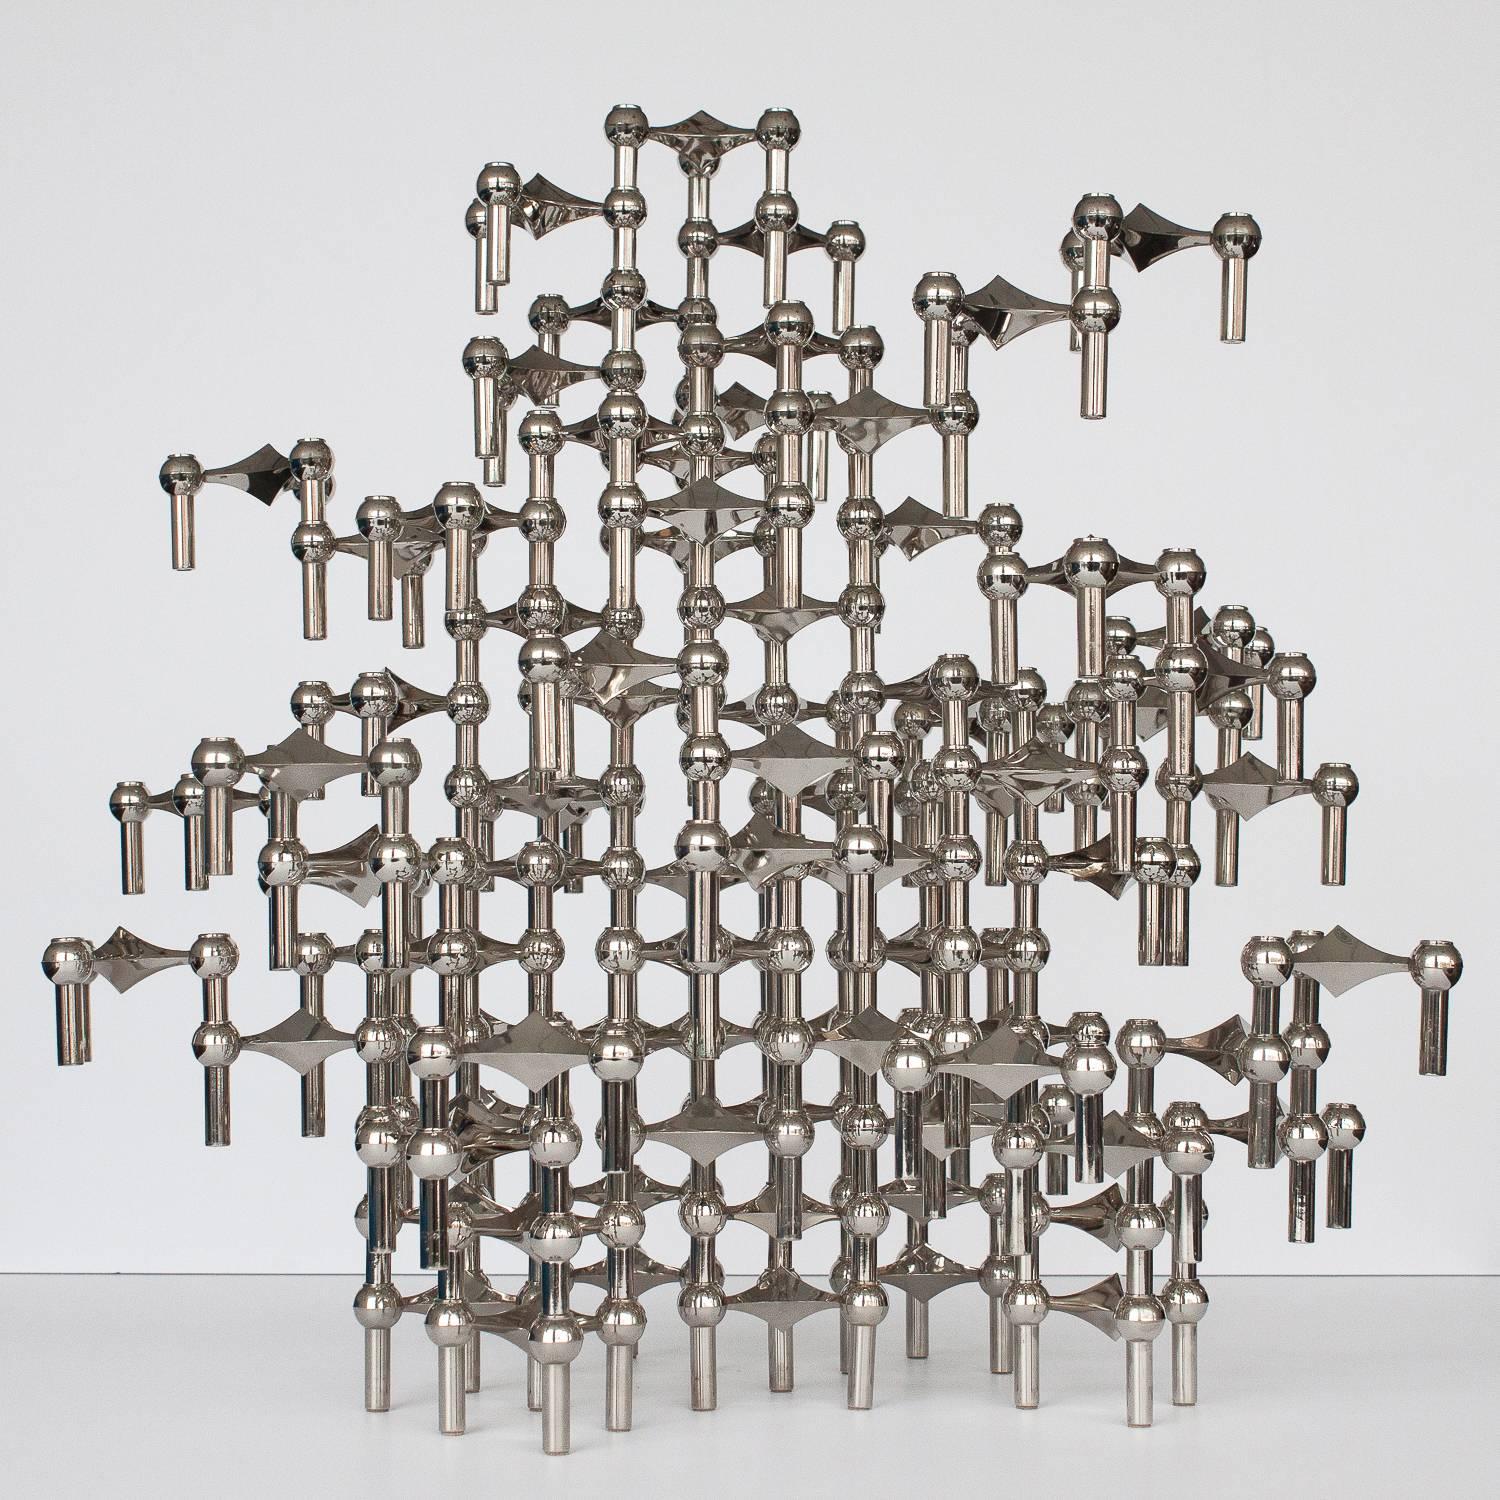 A monumental sculpture made of 87 individual candleholders by Ceasar Stoffi and Fritz Nagel for BMF Germany. This modular design can be configured in an endless number of ways both vertically and horizontally by stacking each interlocking piece.